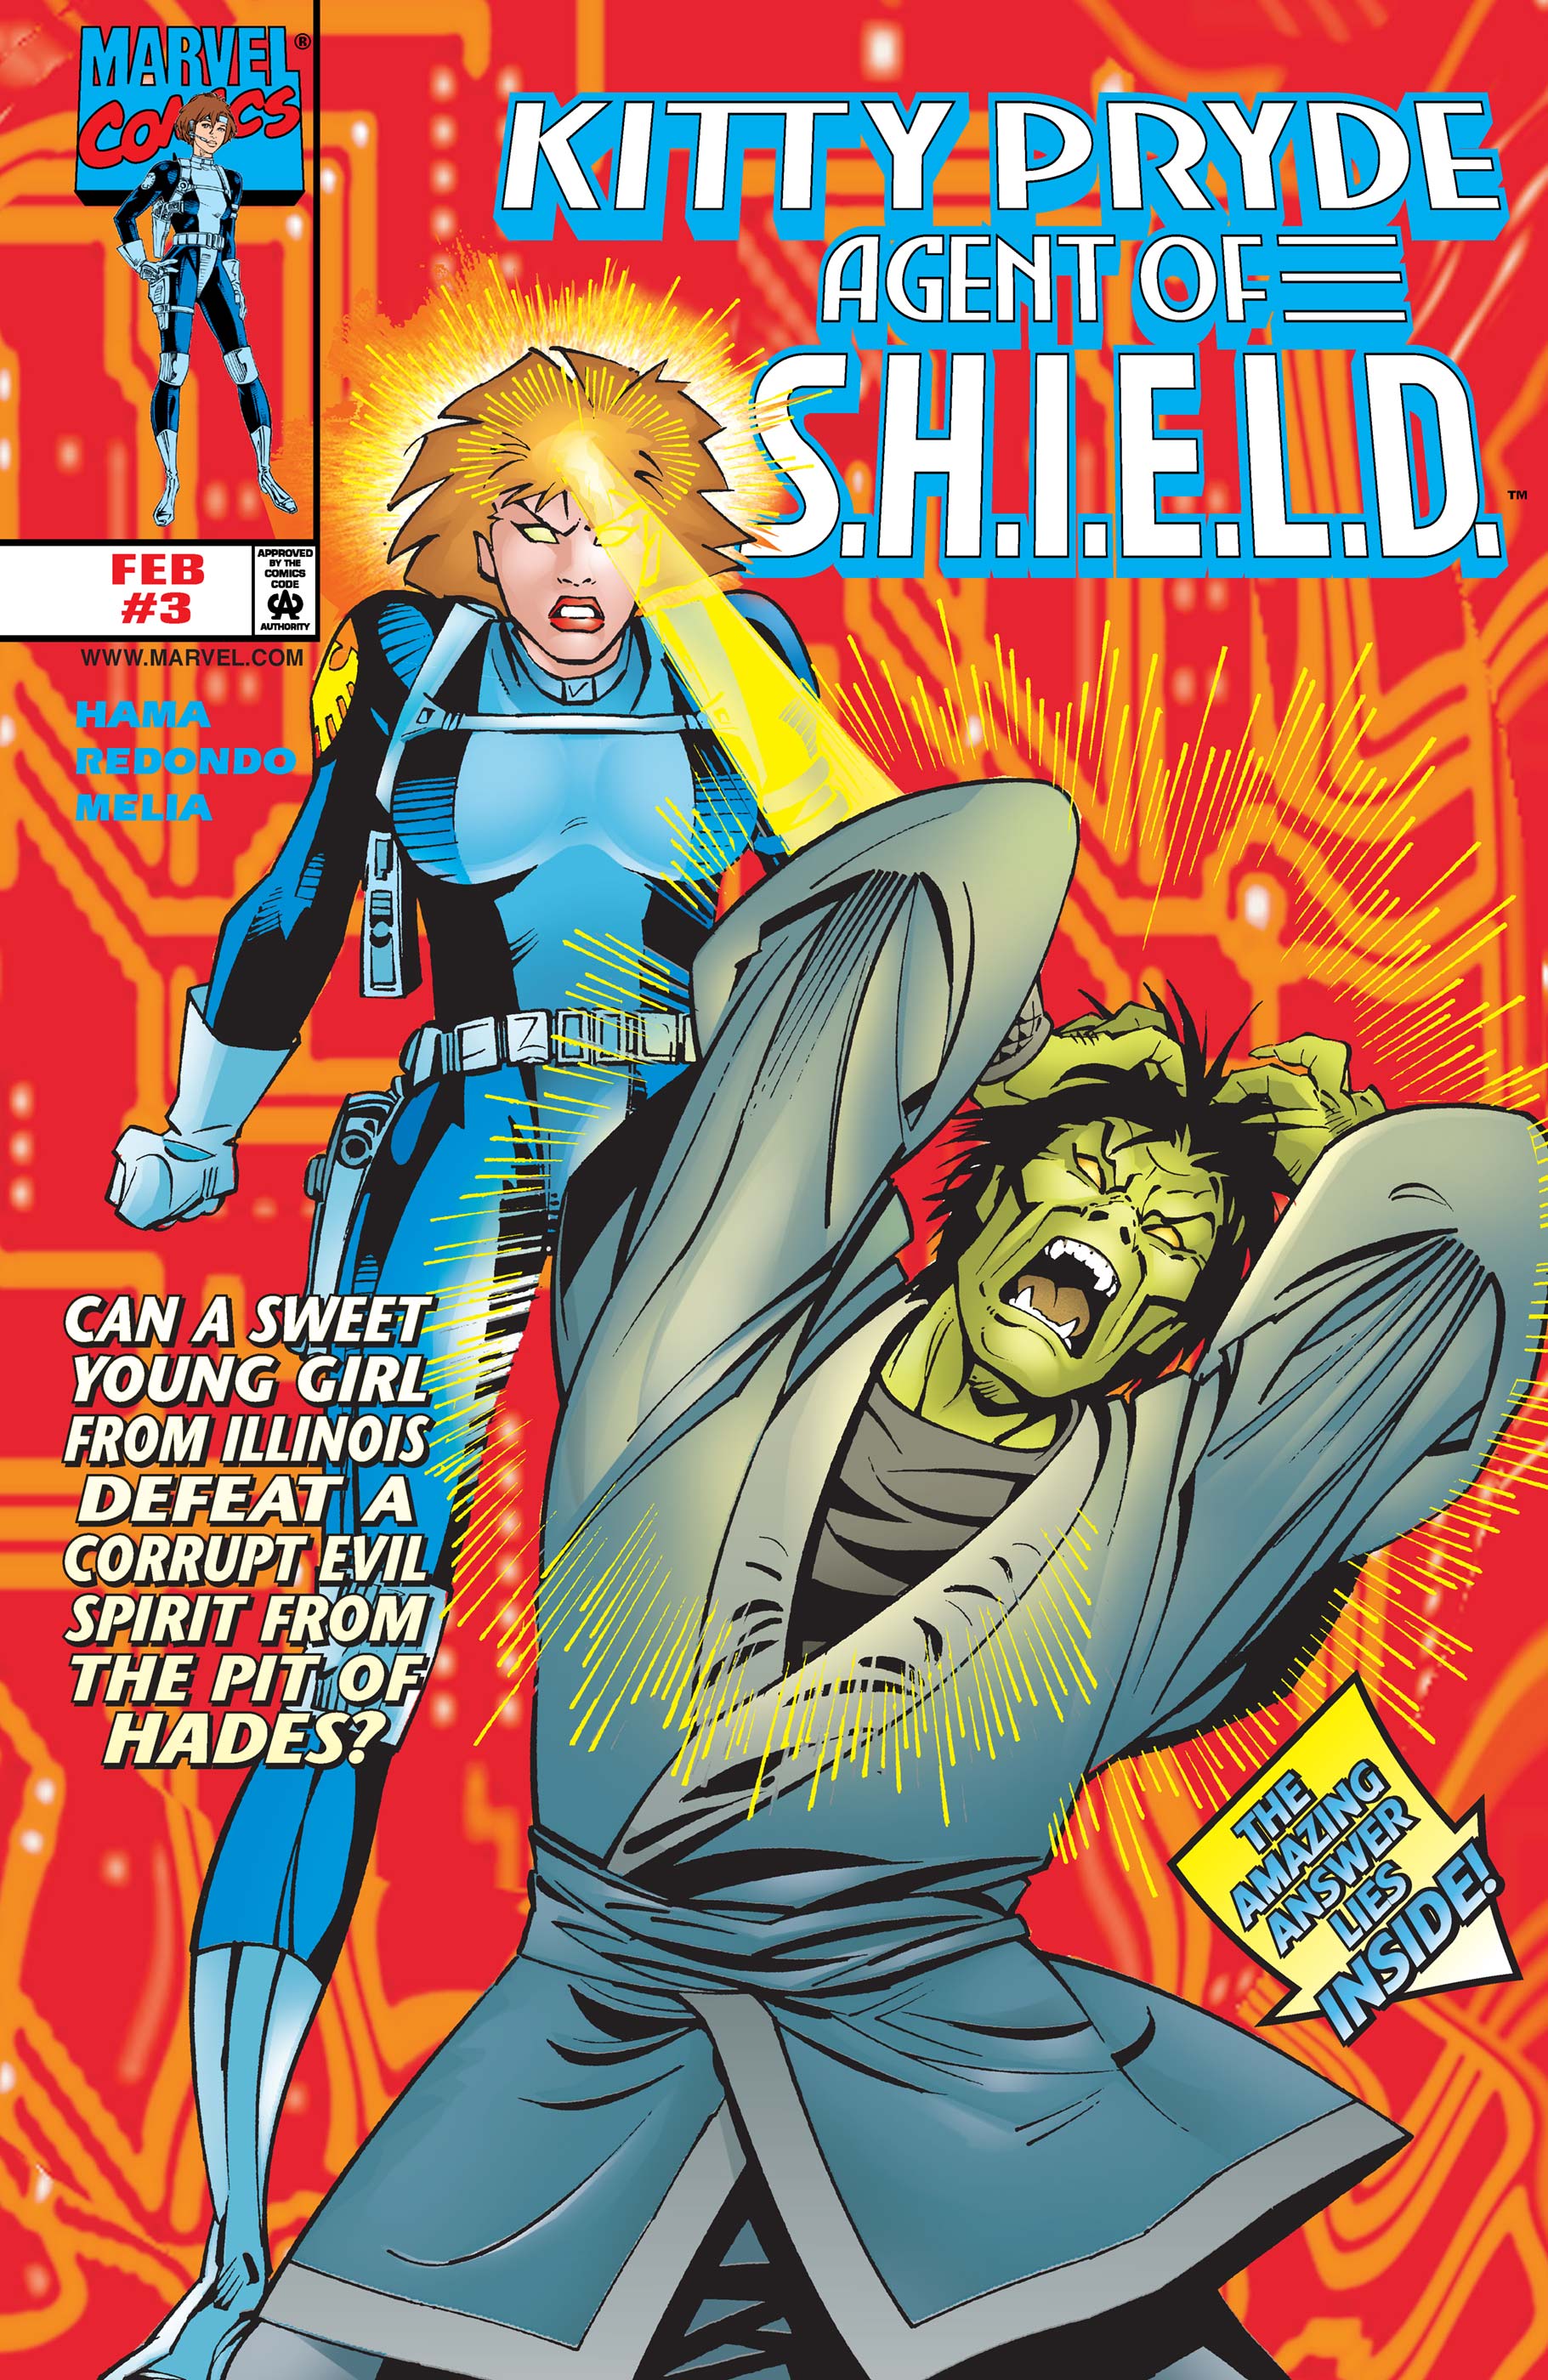 Kitty Pryde, Agent of S.H.I.E.L.D. (1997) #3